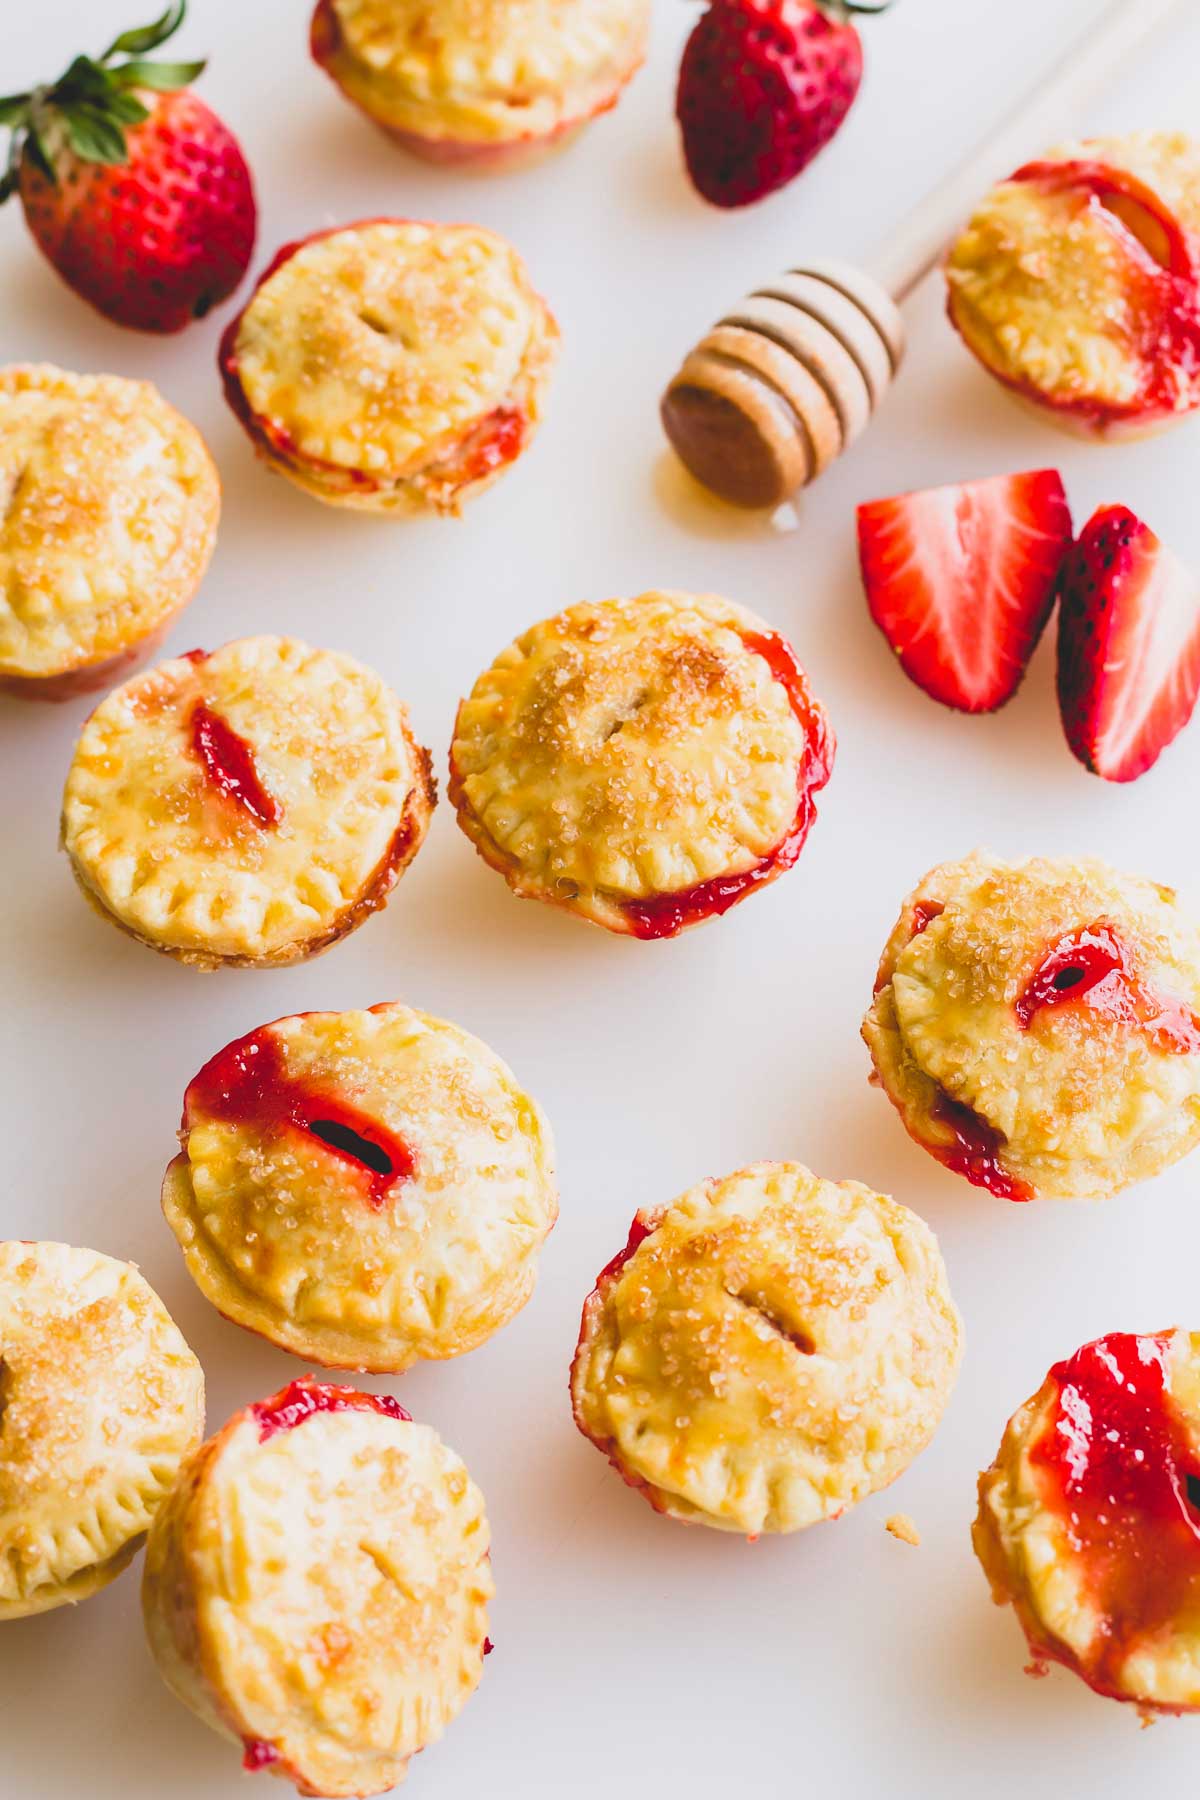 Mini strawberry pies on a white surface with decorative strawberries on the side.